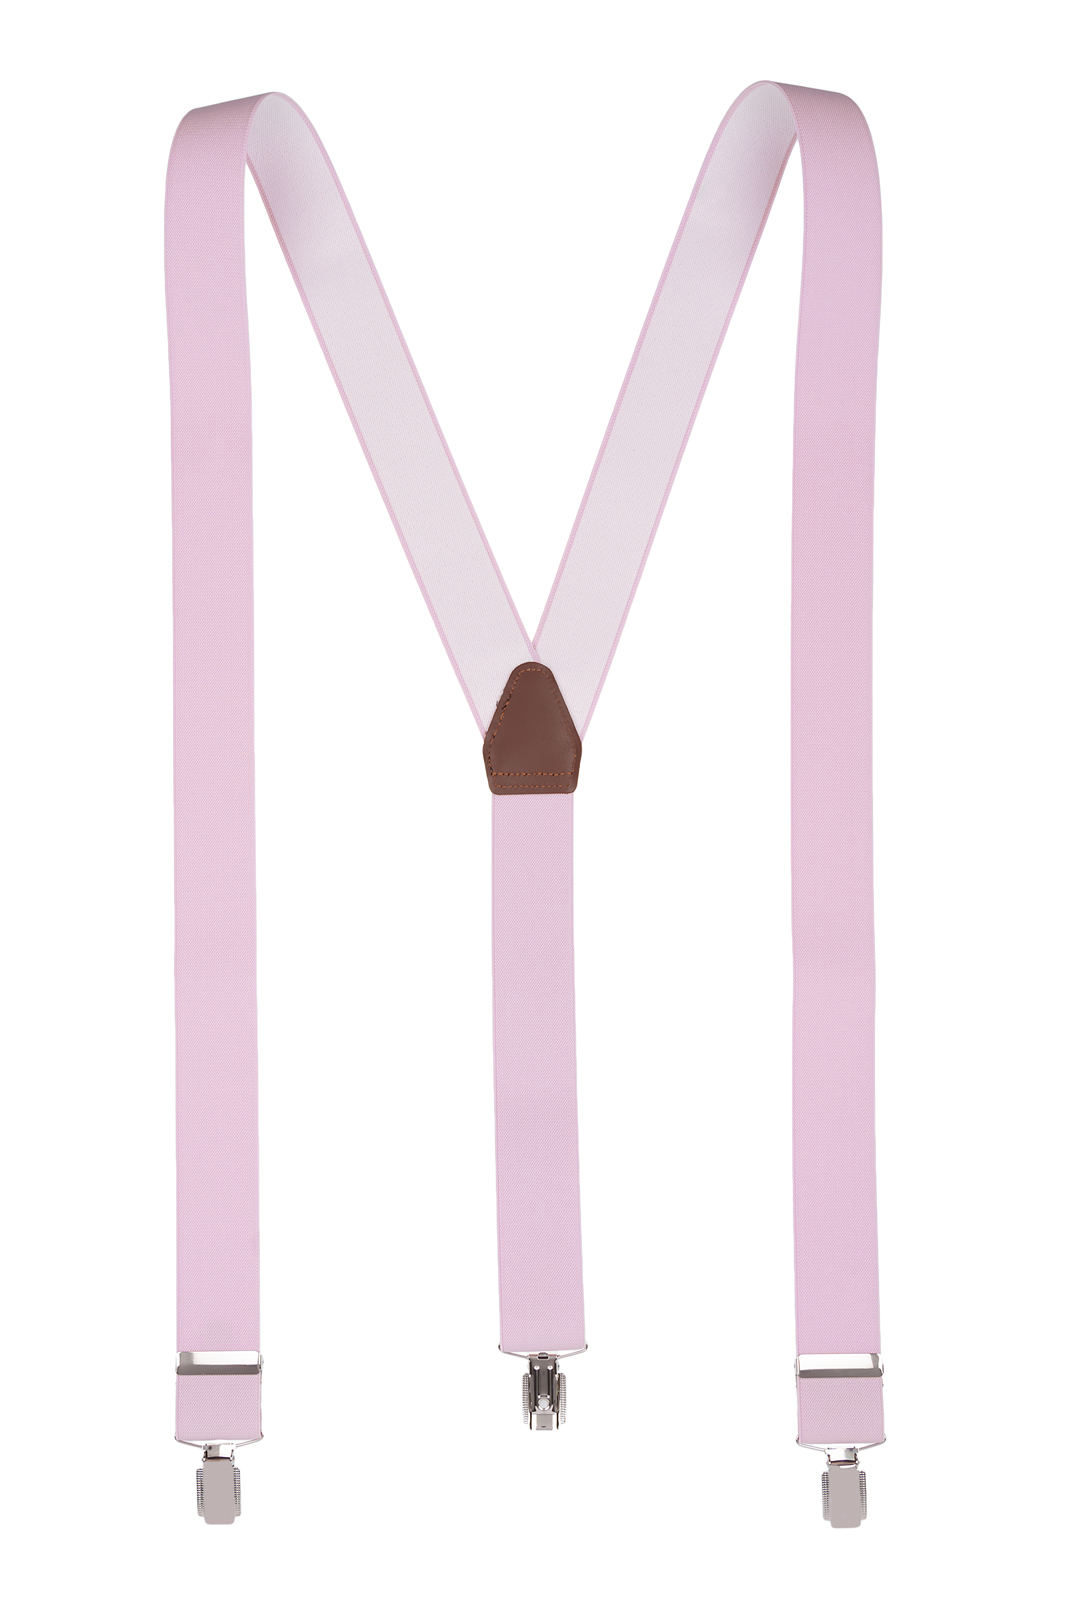 Light Pink Y Trouser Braces with Silver Clips